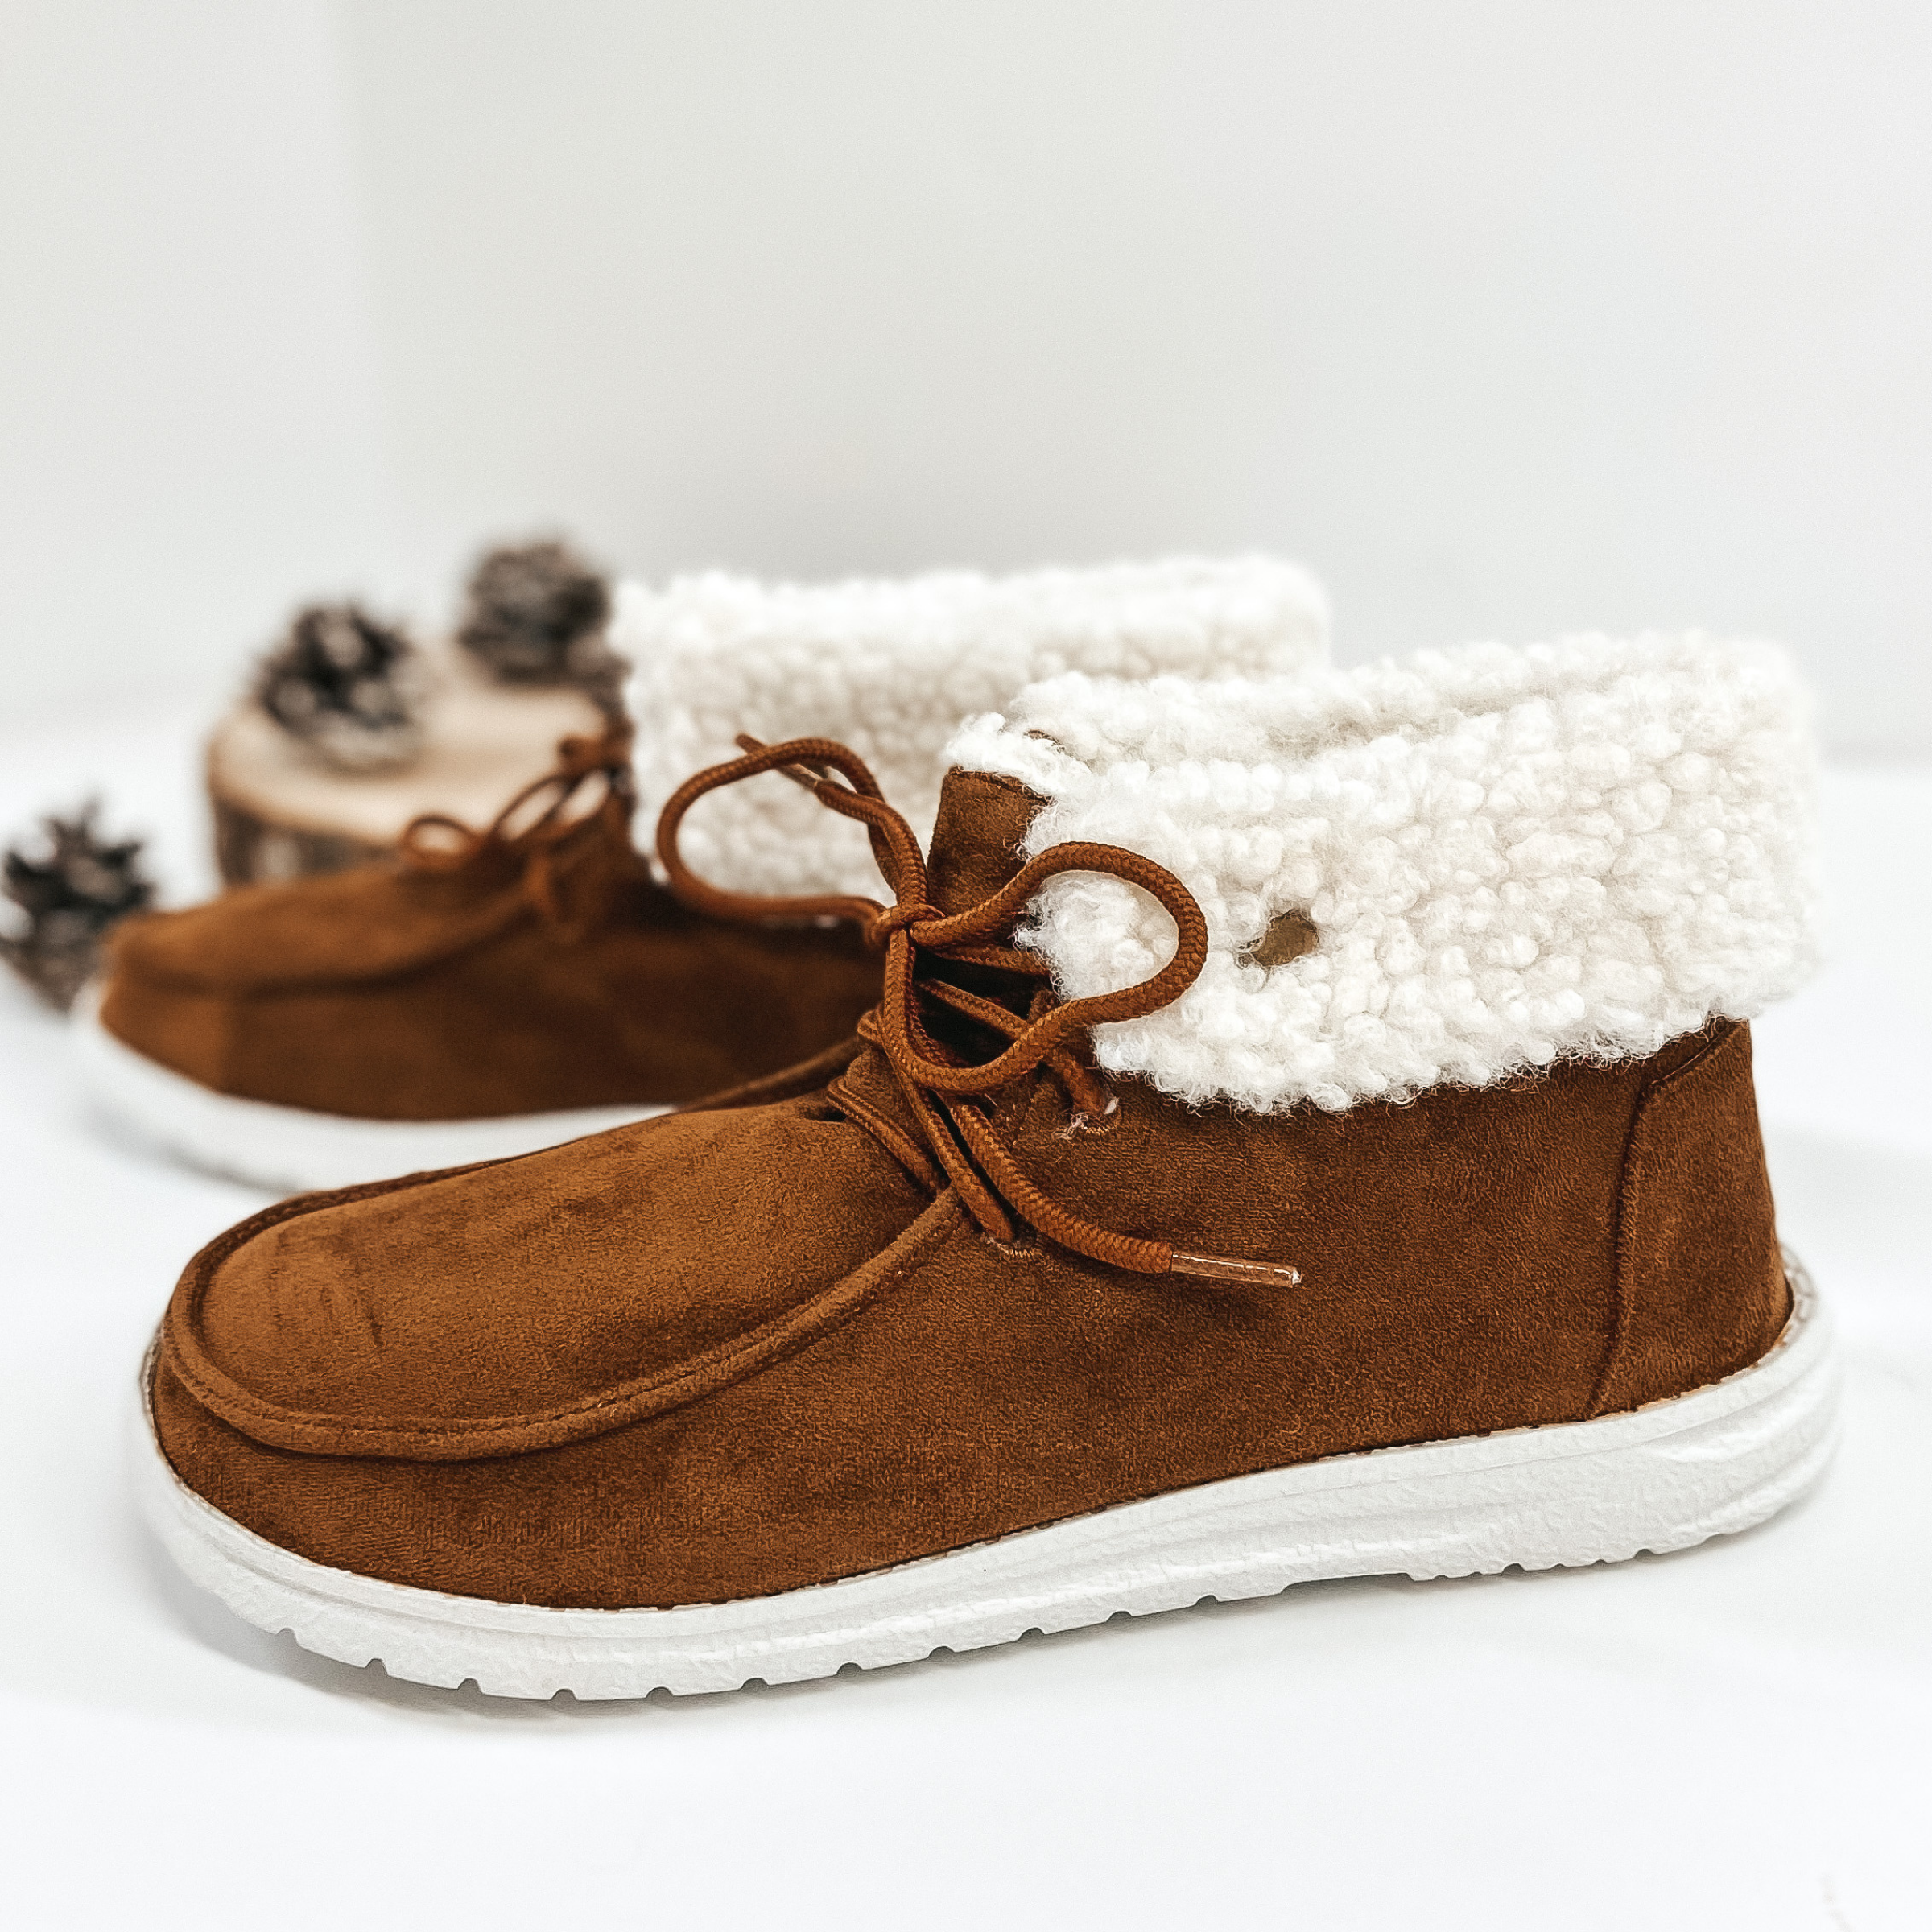 Very G | Have To Run High Top Slip On Loafers with Laces and Sherpa Lining in Tan